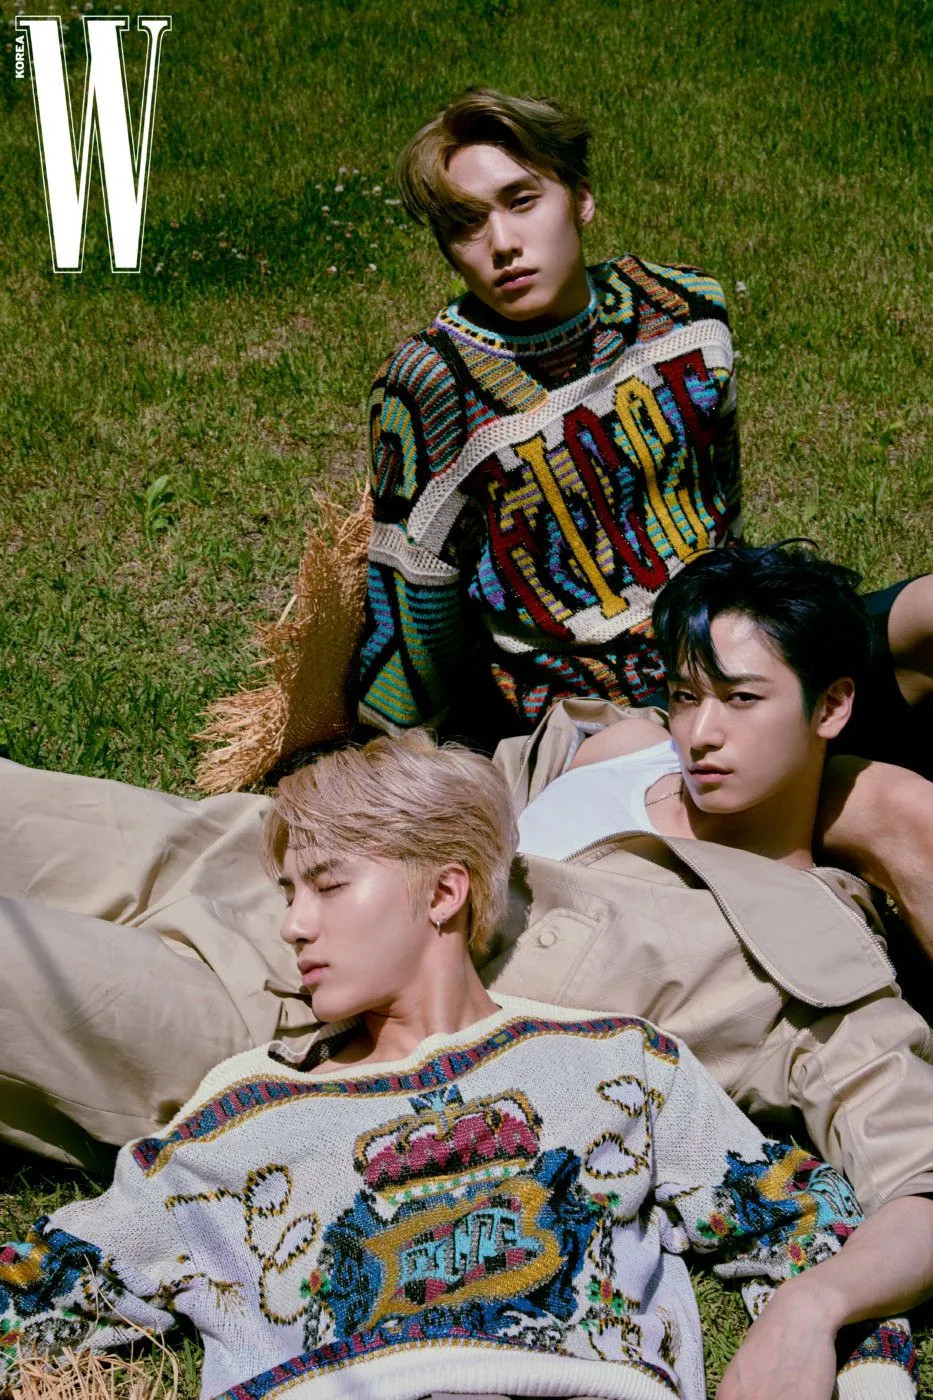 THE BOYZ for W Korea 2020 July Issue | kpopping